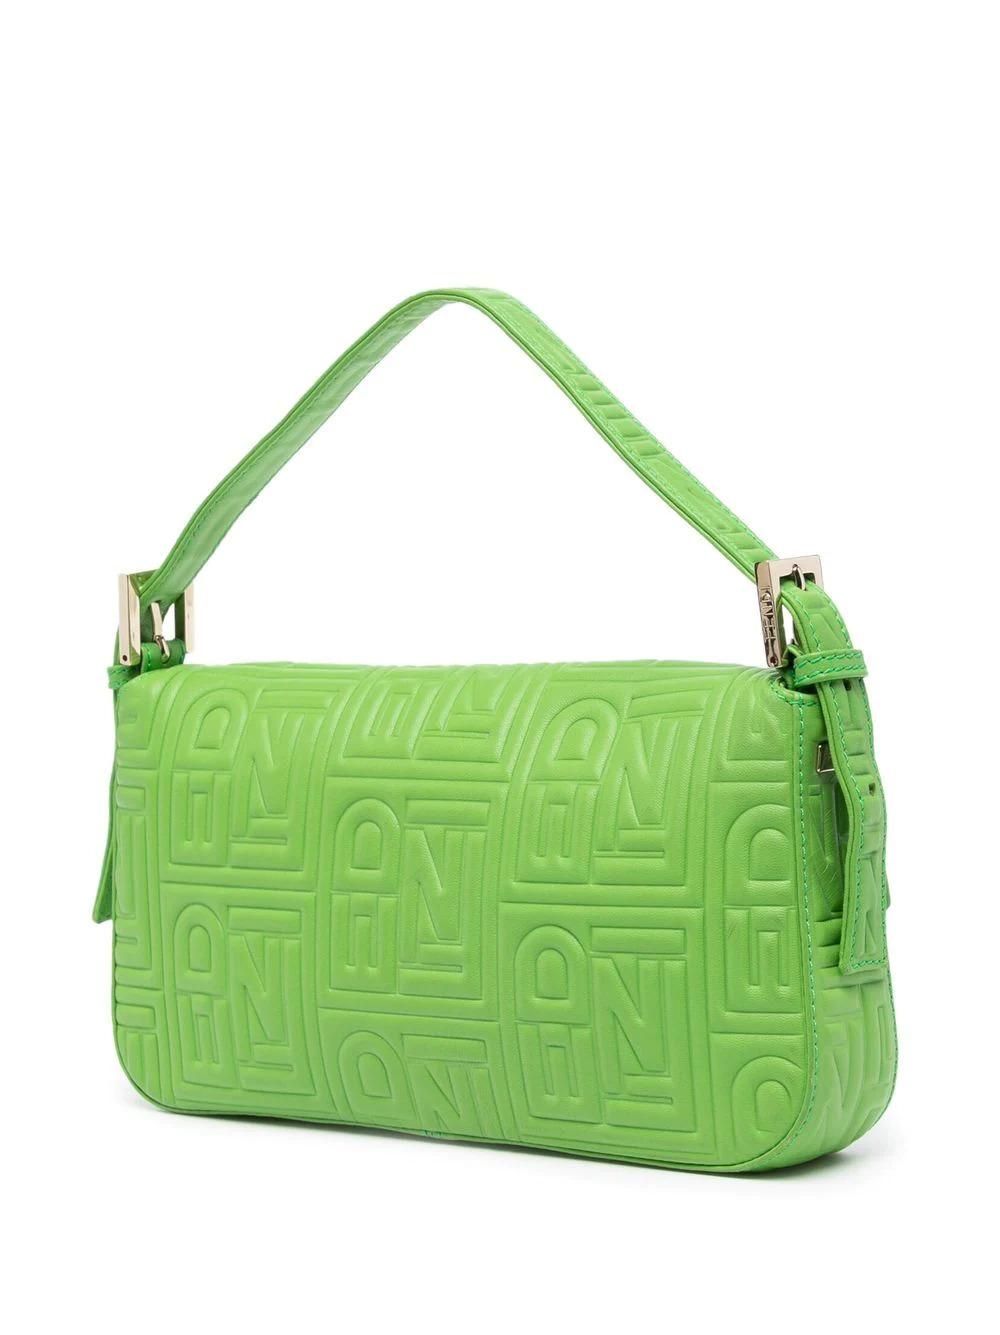 First released in the late 90's, inspired by how French women carried a loaf of bread under their arms, hence its name, the Fendi Baguette has remained at the height of Its bag status ever since. Crafted in Italy from quality neon-green leather,